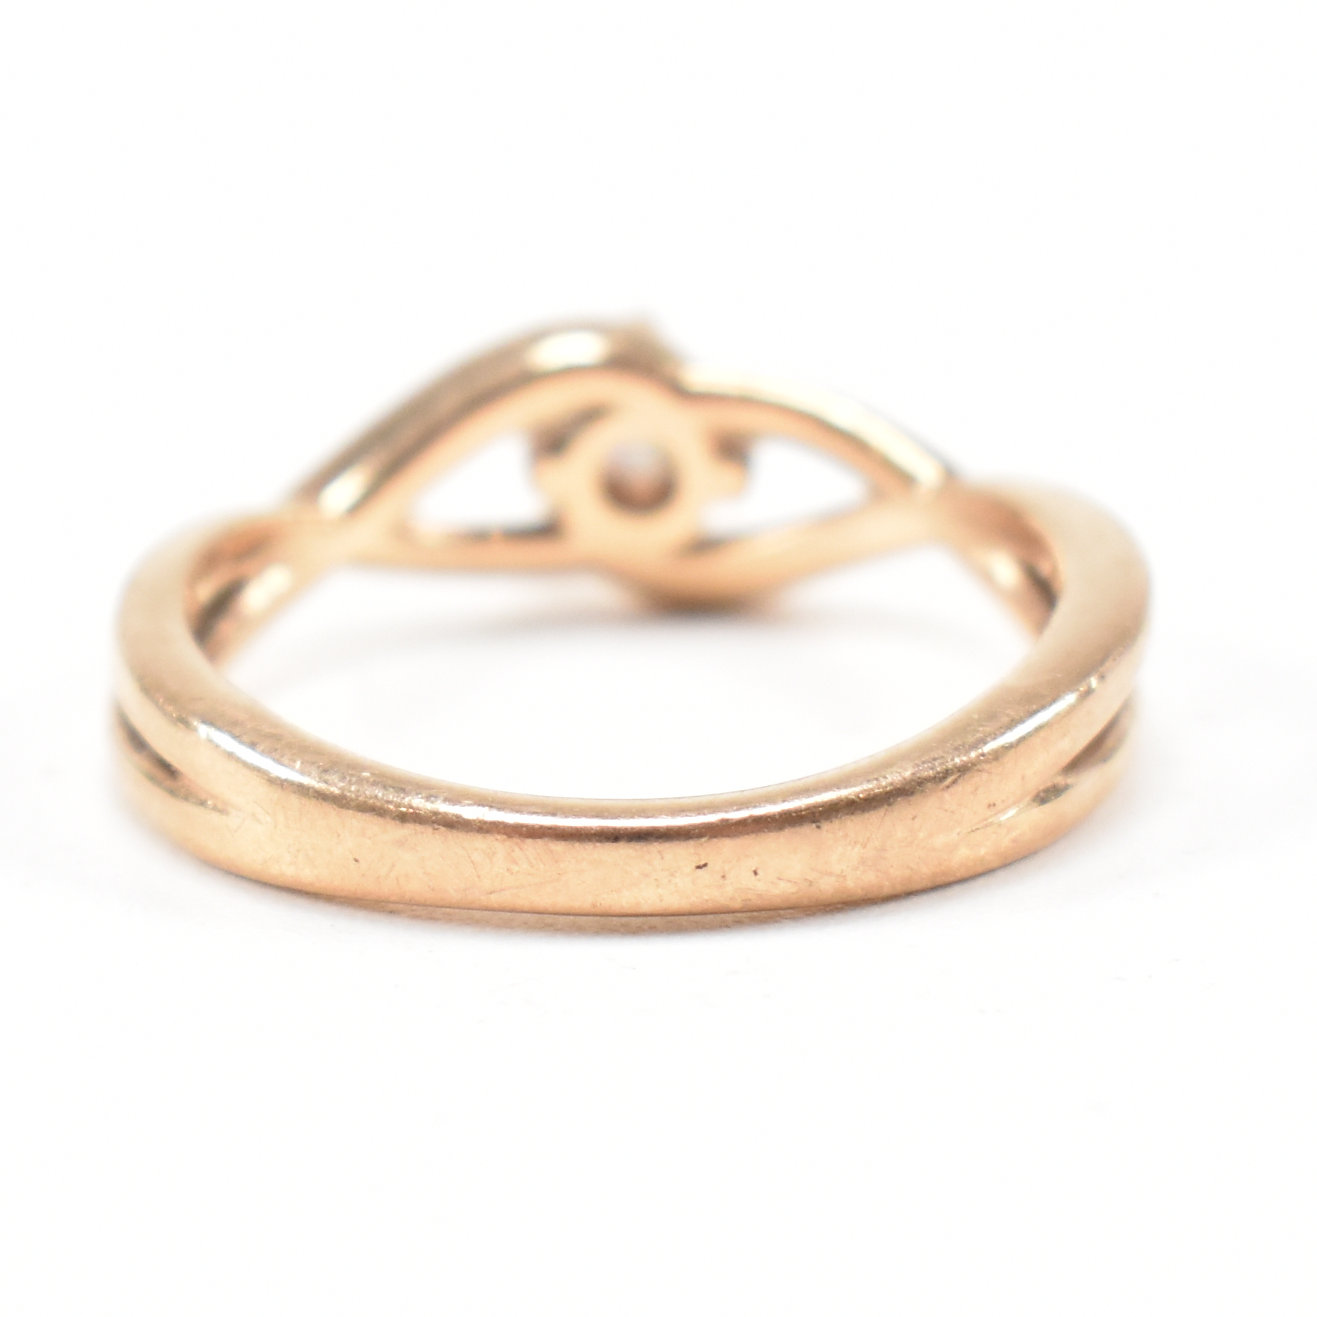 HALLMARKED 9CT ROSE GOLD & WHITE STONE SOLITAIRE CROSSOVER RING - Image 6 of 9